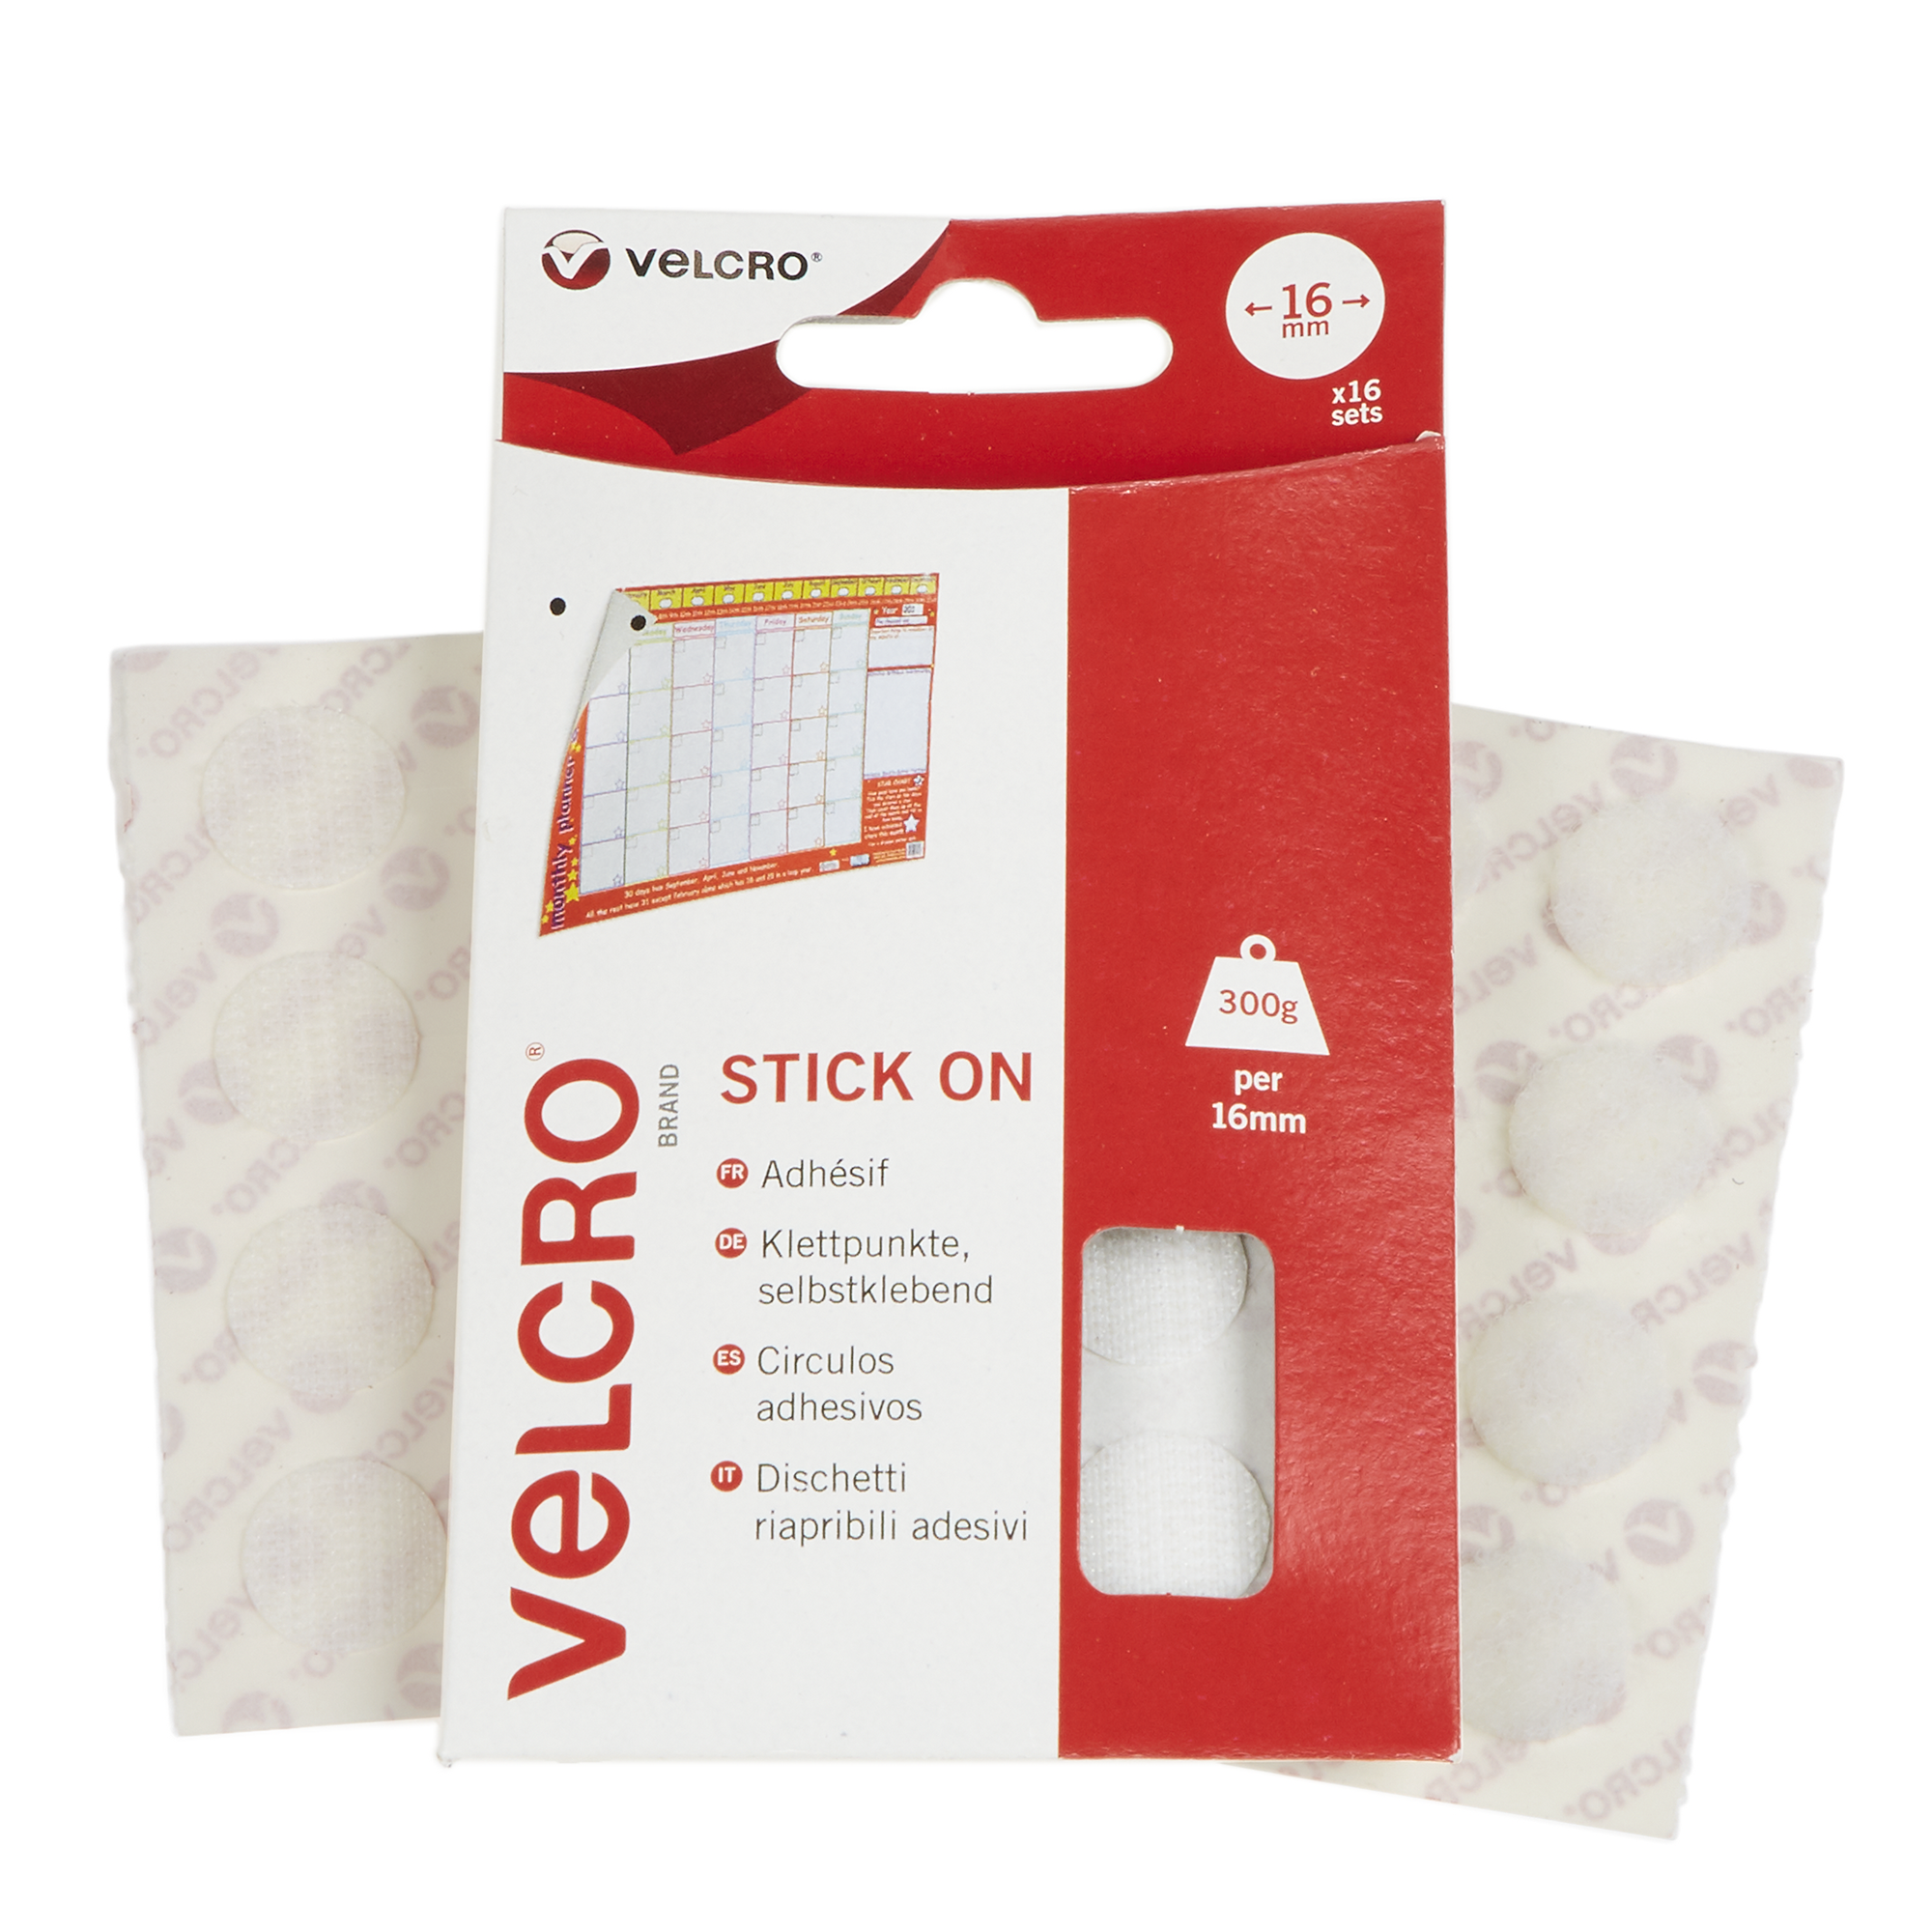 VELCRO Brand Hook and Loop Coins - 16mm - White